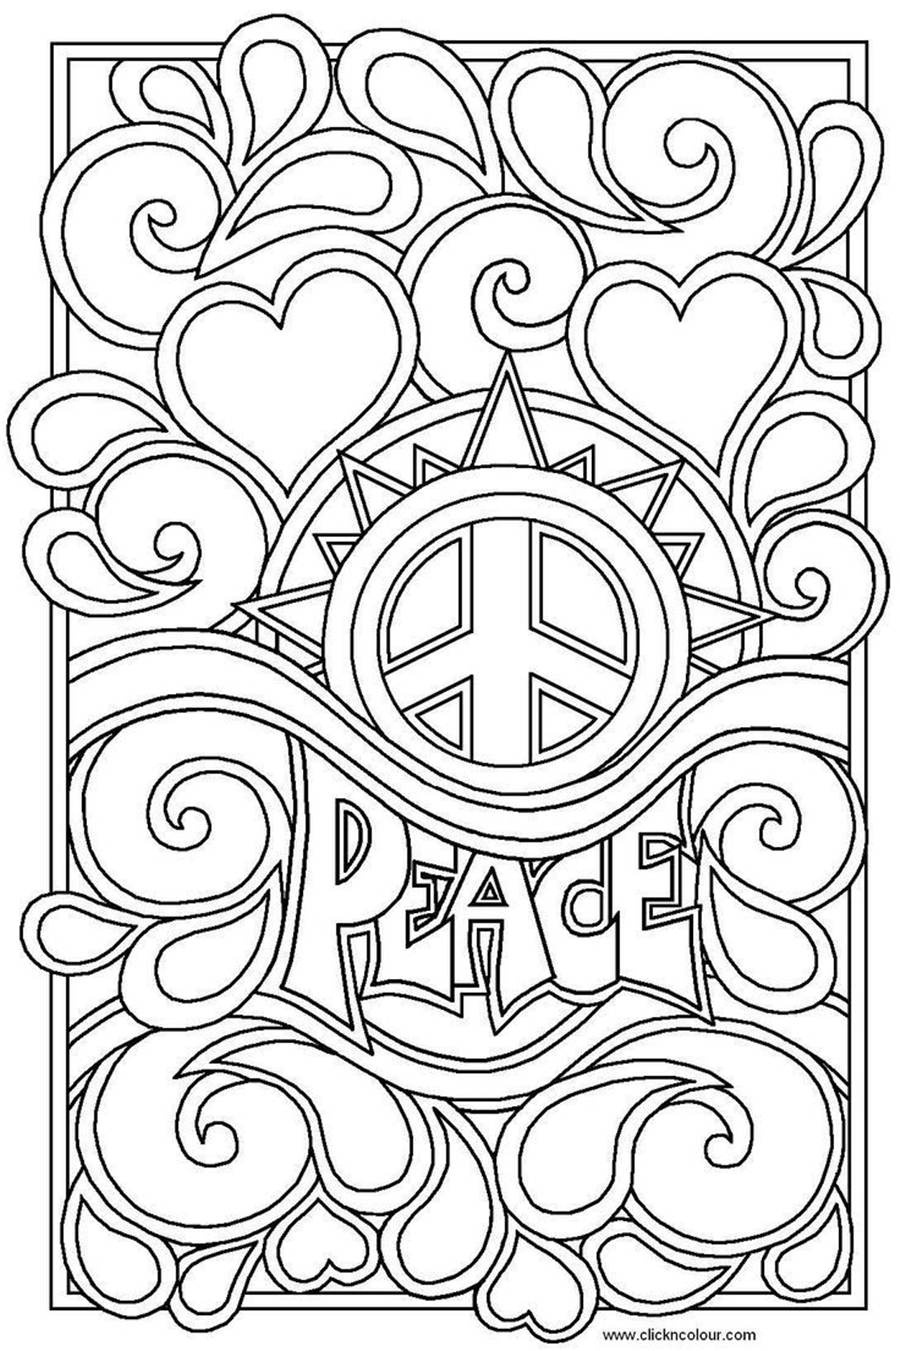 Free Printable Coloring Pages On Respect | Free Printable